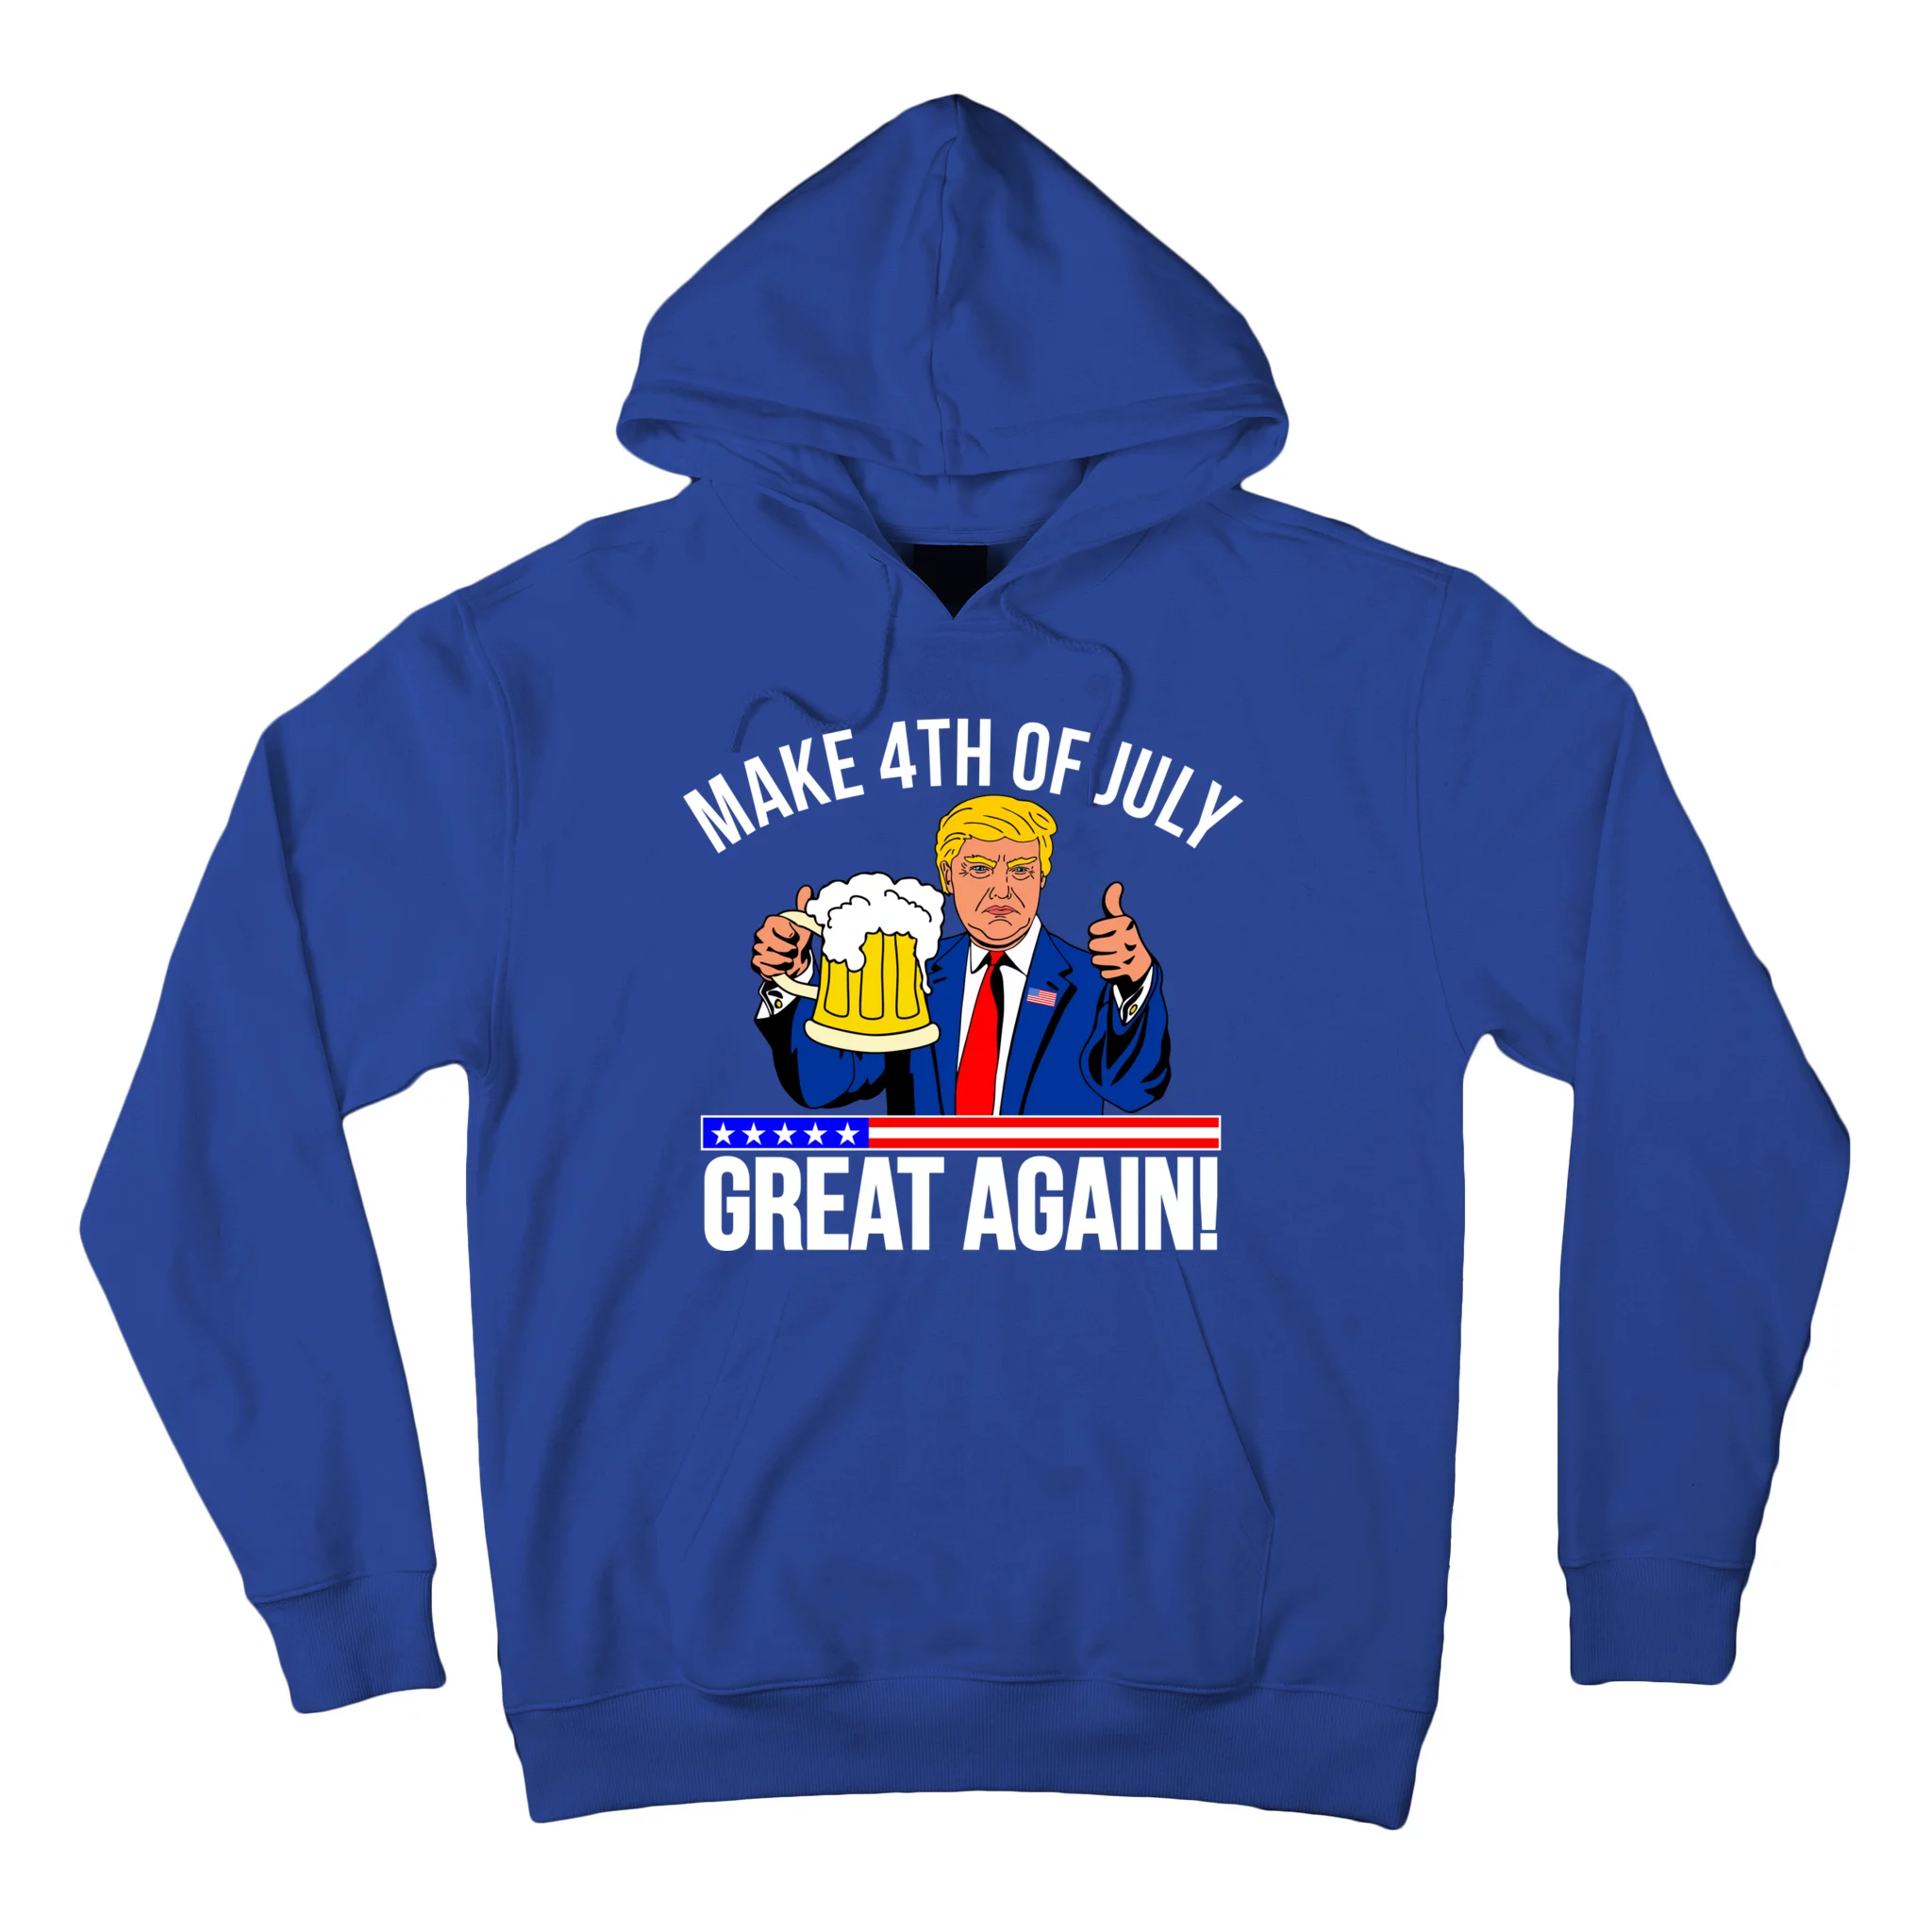 Make 4th of July Great Again! Donald Trump Beer USA Hoodie